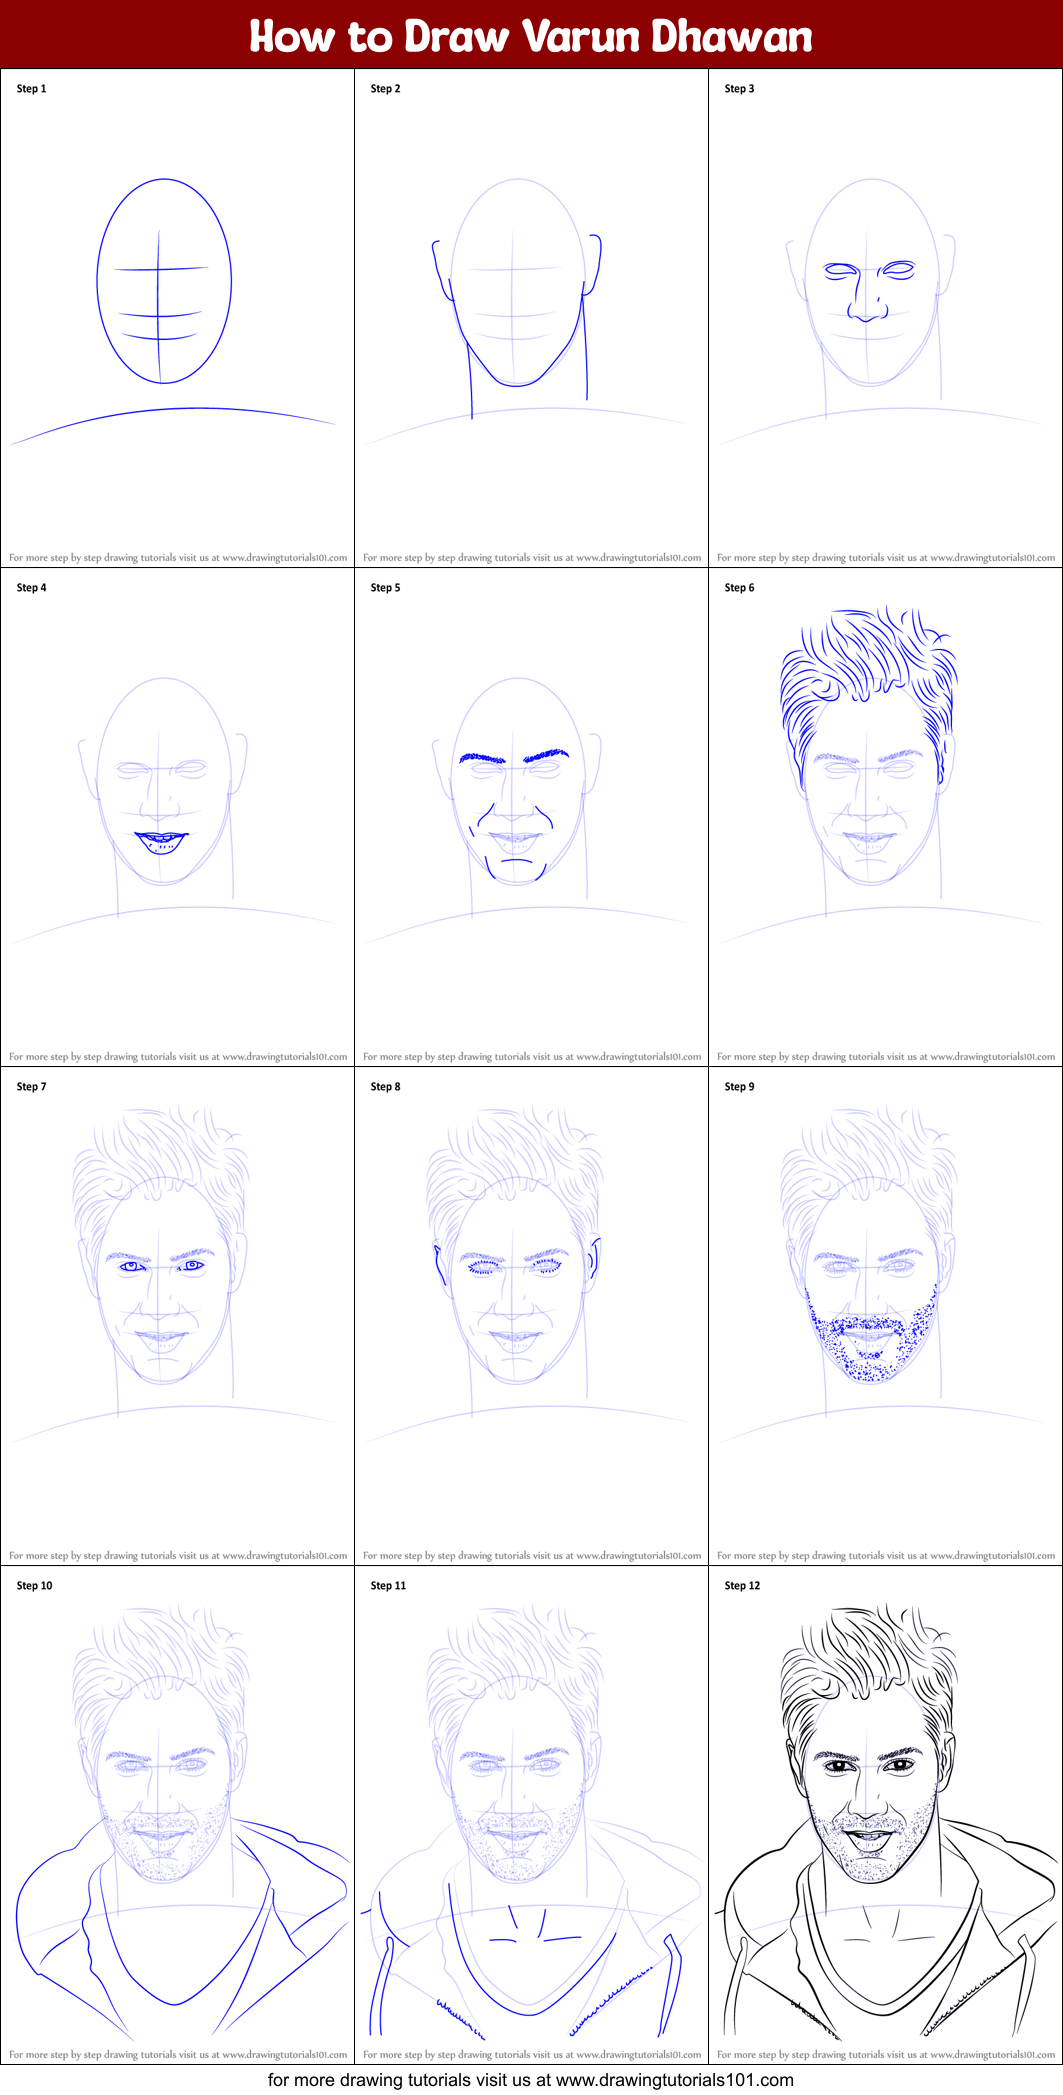 How To Draw Varun Dhawan Printable Step By Step Drawing Sheet Drawingtutorials101 Com If there's one star in the bollywood industry whose style speaks to the millennials at the utmost basic level, it's varun dhawan. how to draw varun dhawan printable step